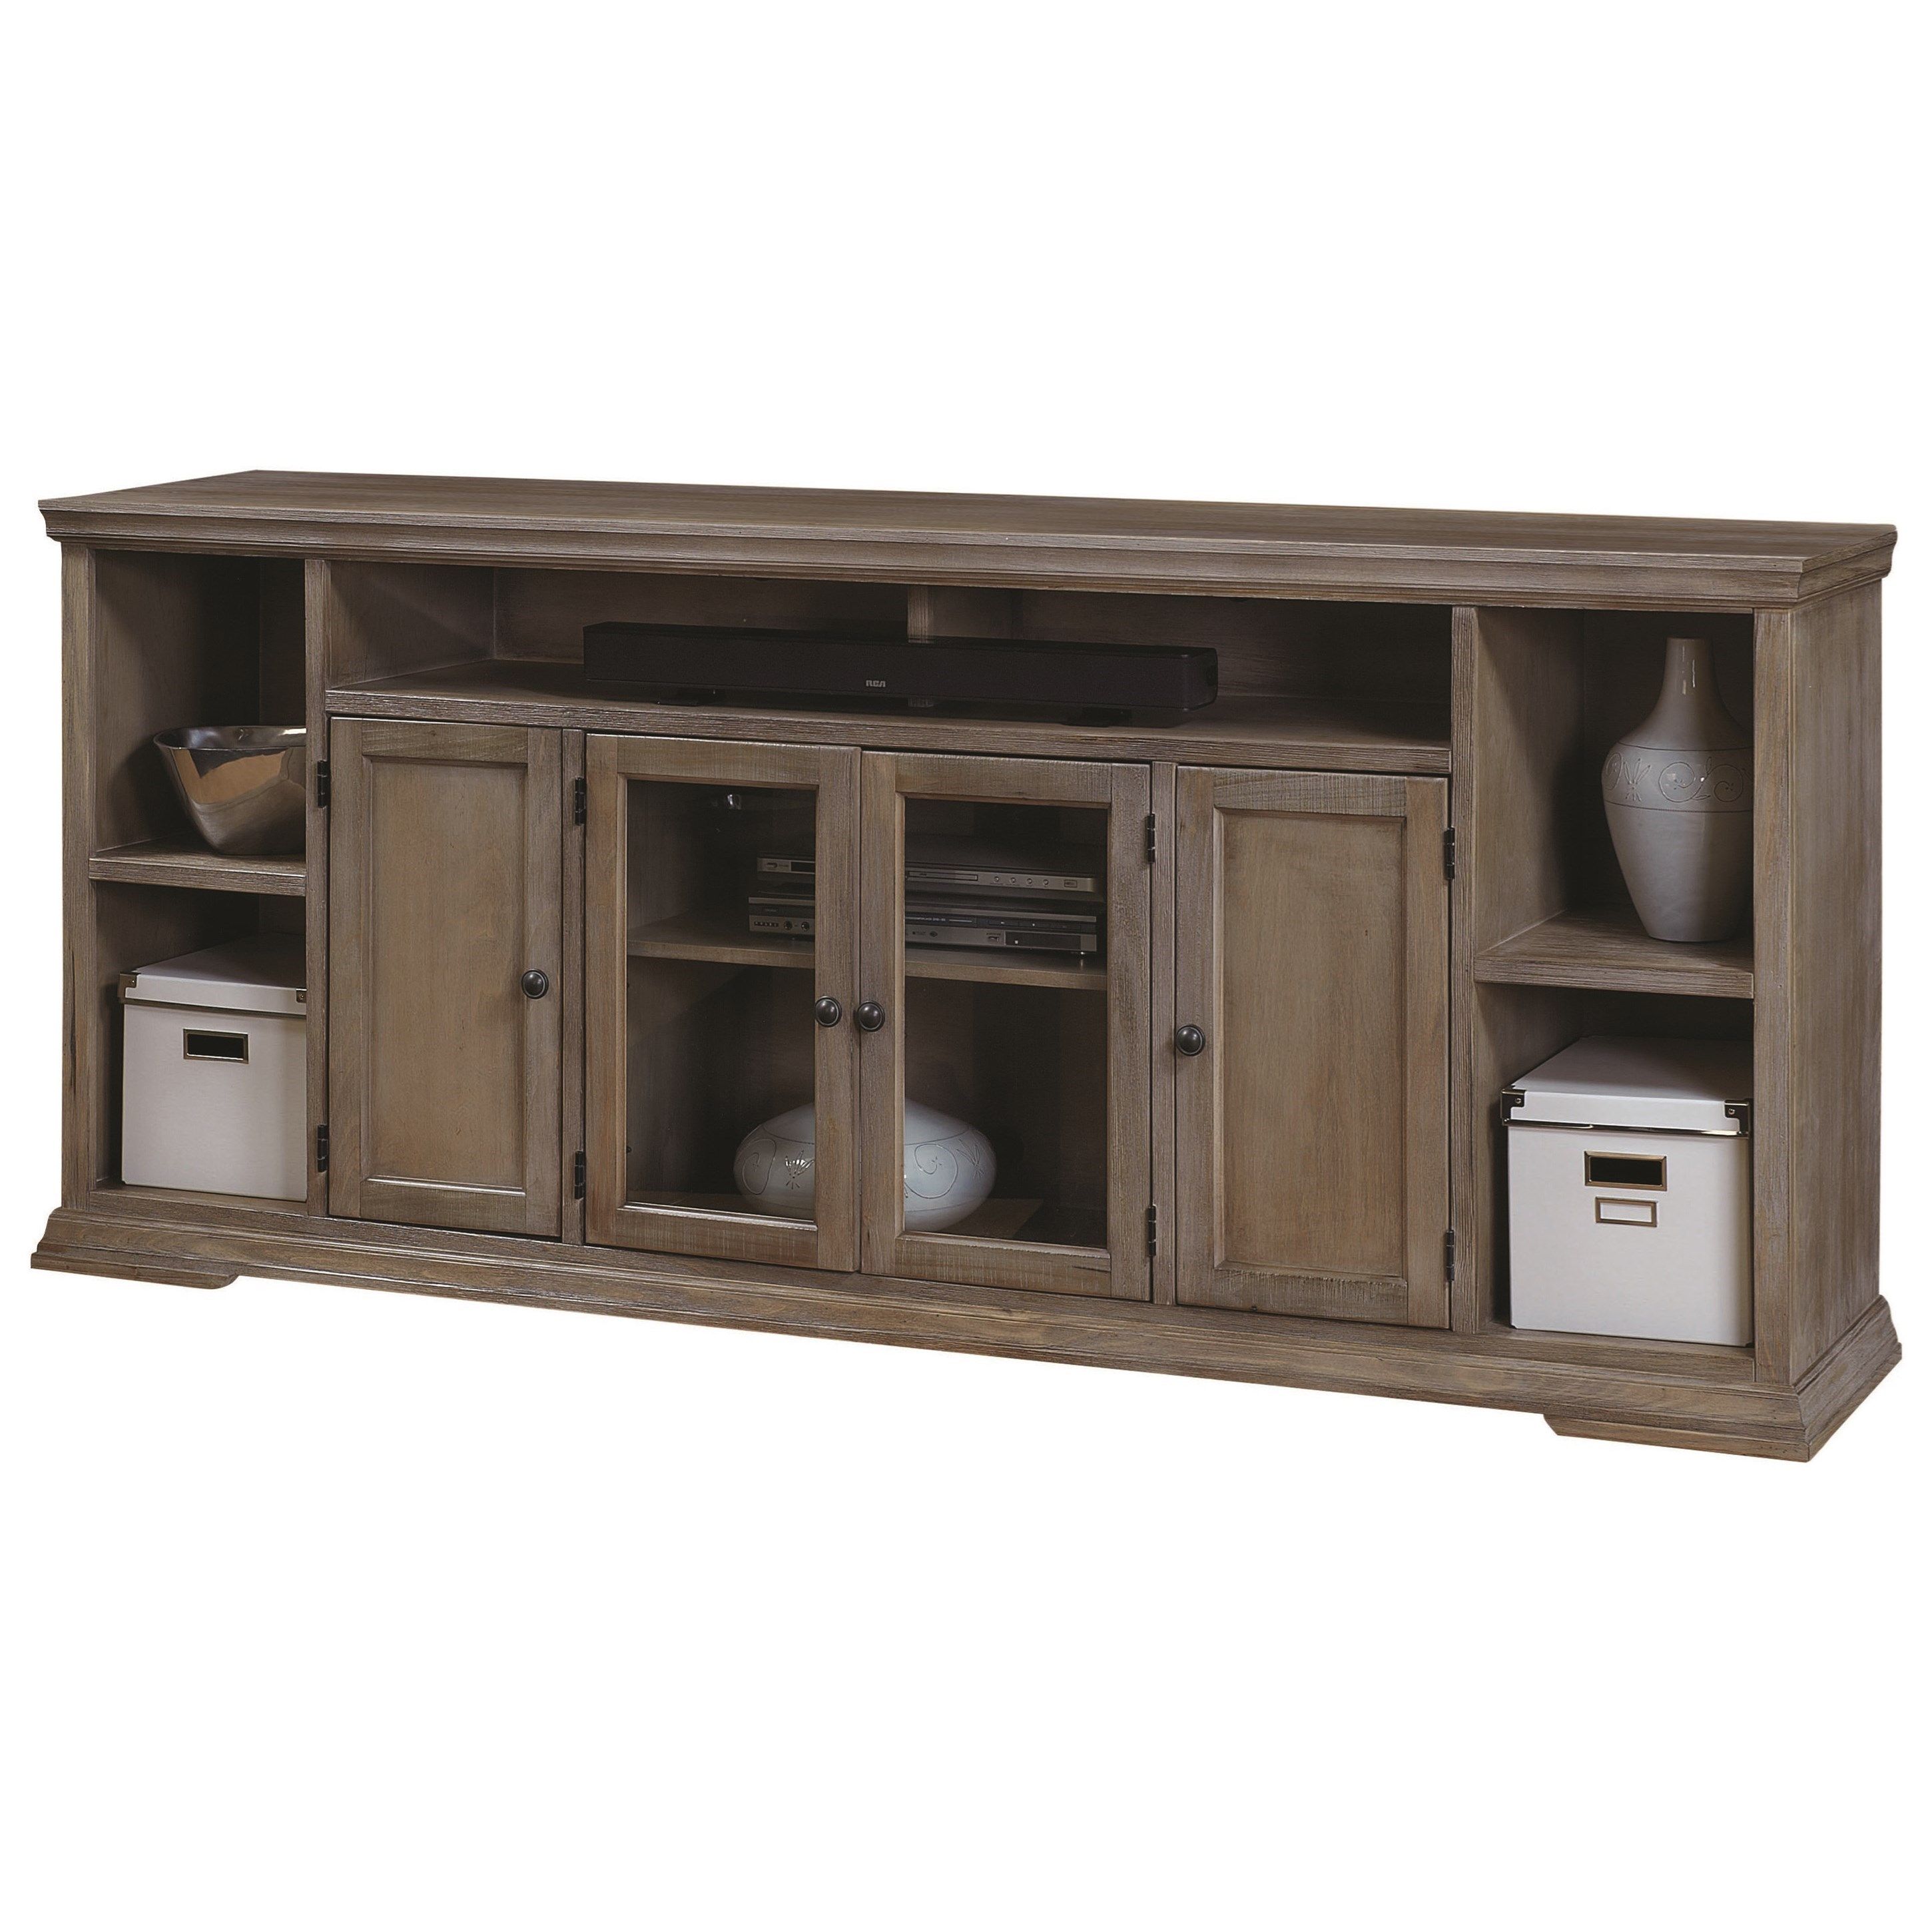 Tv Stands | Stoney Creek Furniture Within Canyon 74 Inch Tv Stands (View 21 of 30)